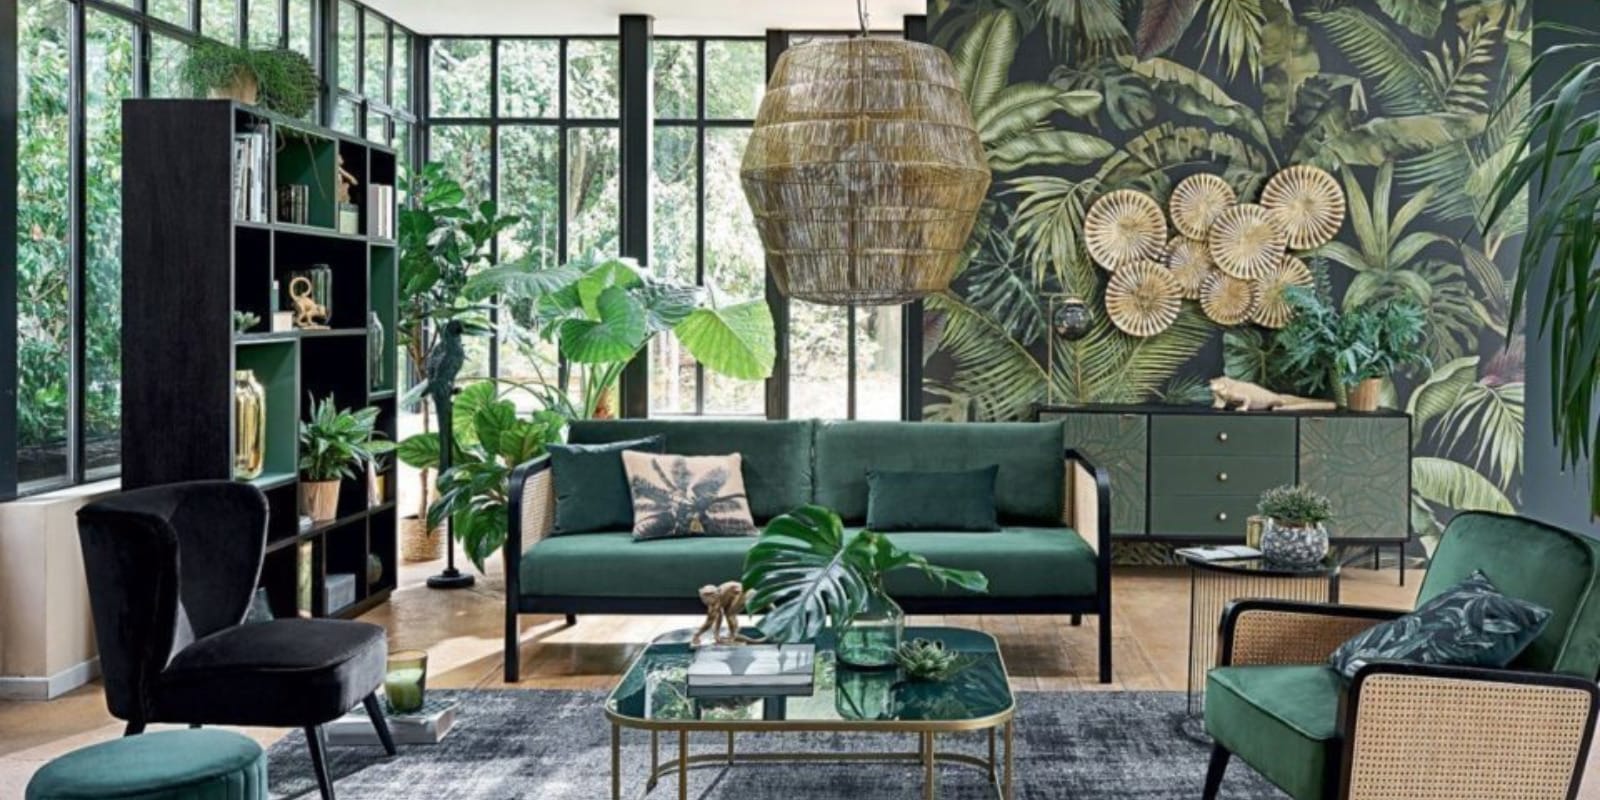 New interiors for every taste by Maisons du Monde store